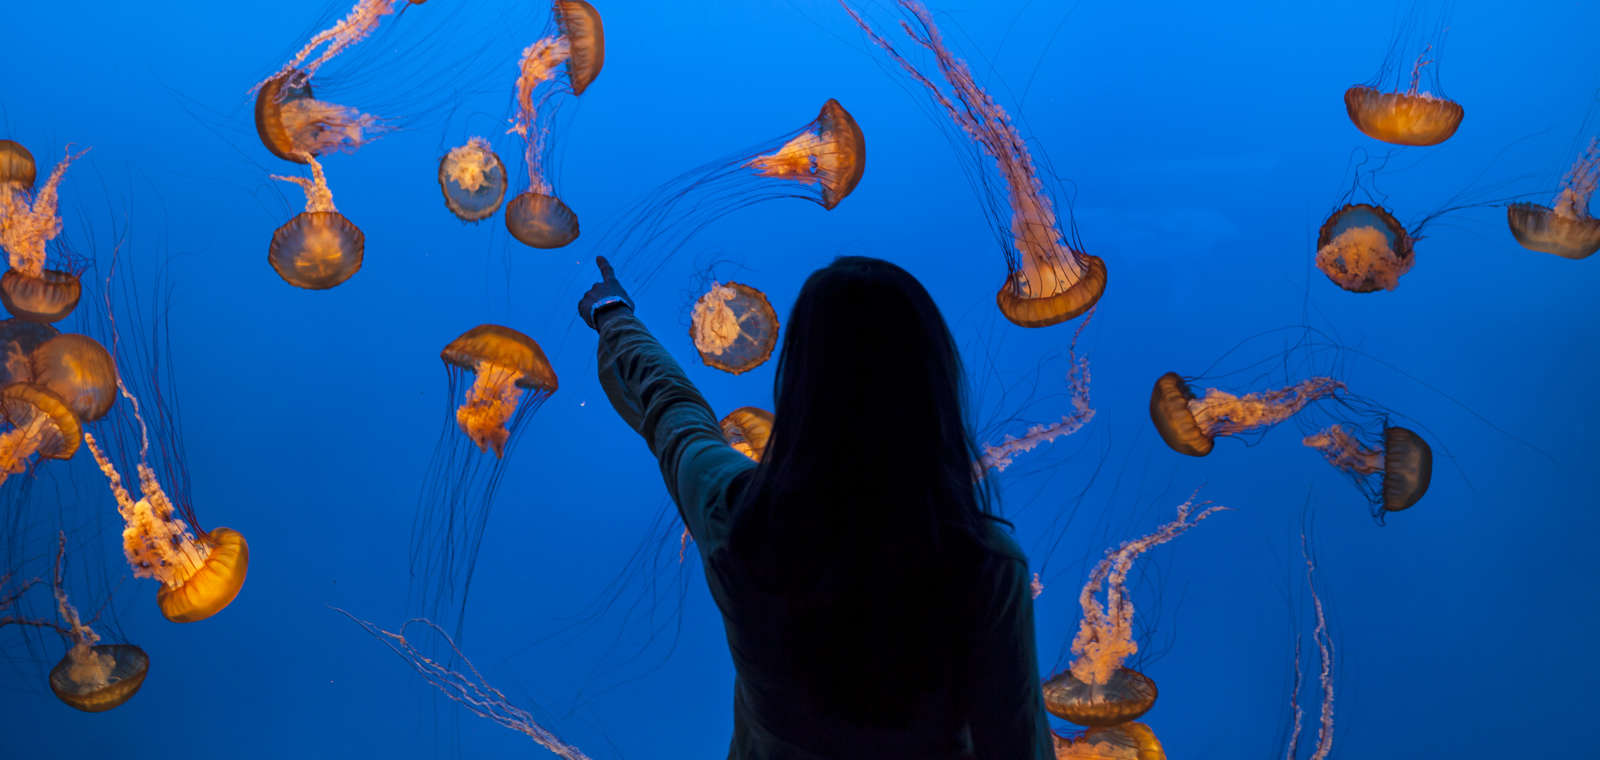 Girl points to fish, animals, plants and seaweed on the bottom of the ocean.  Sea nettle jelly fish animals, plants and seaweed